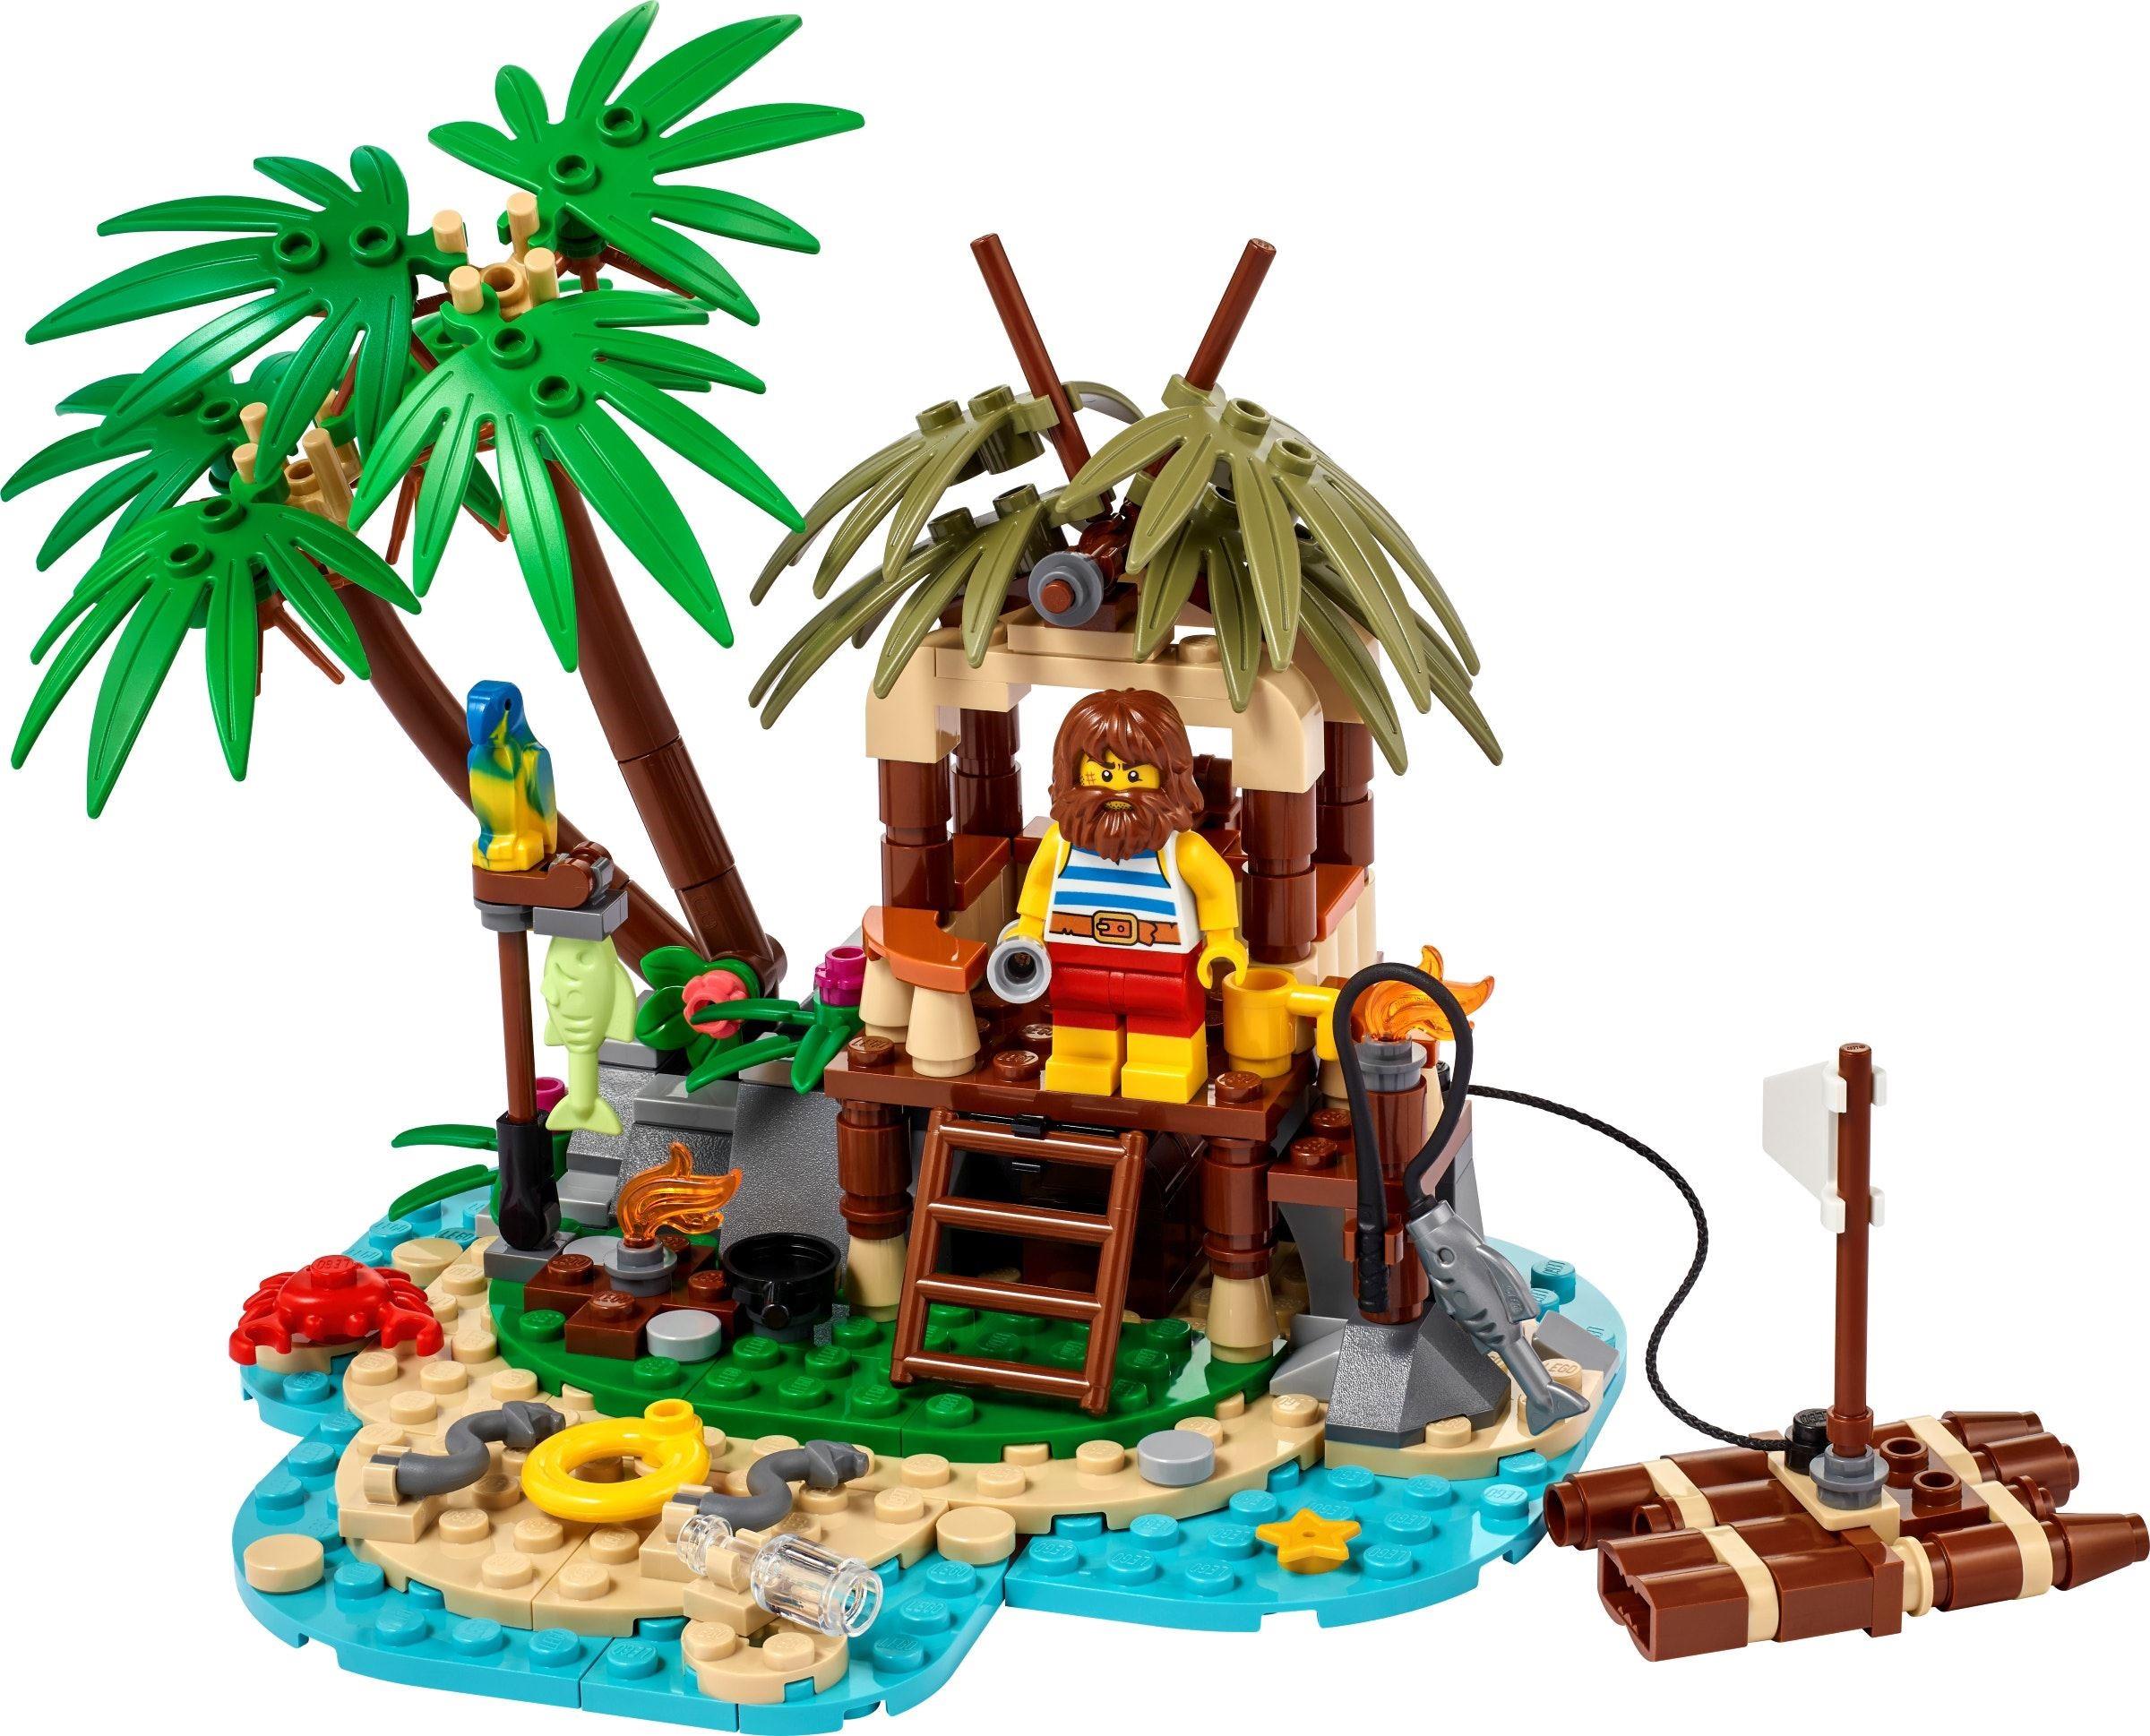 Top 10 Rejected LEGO IDEAS Sets Worth Checking Out